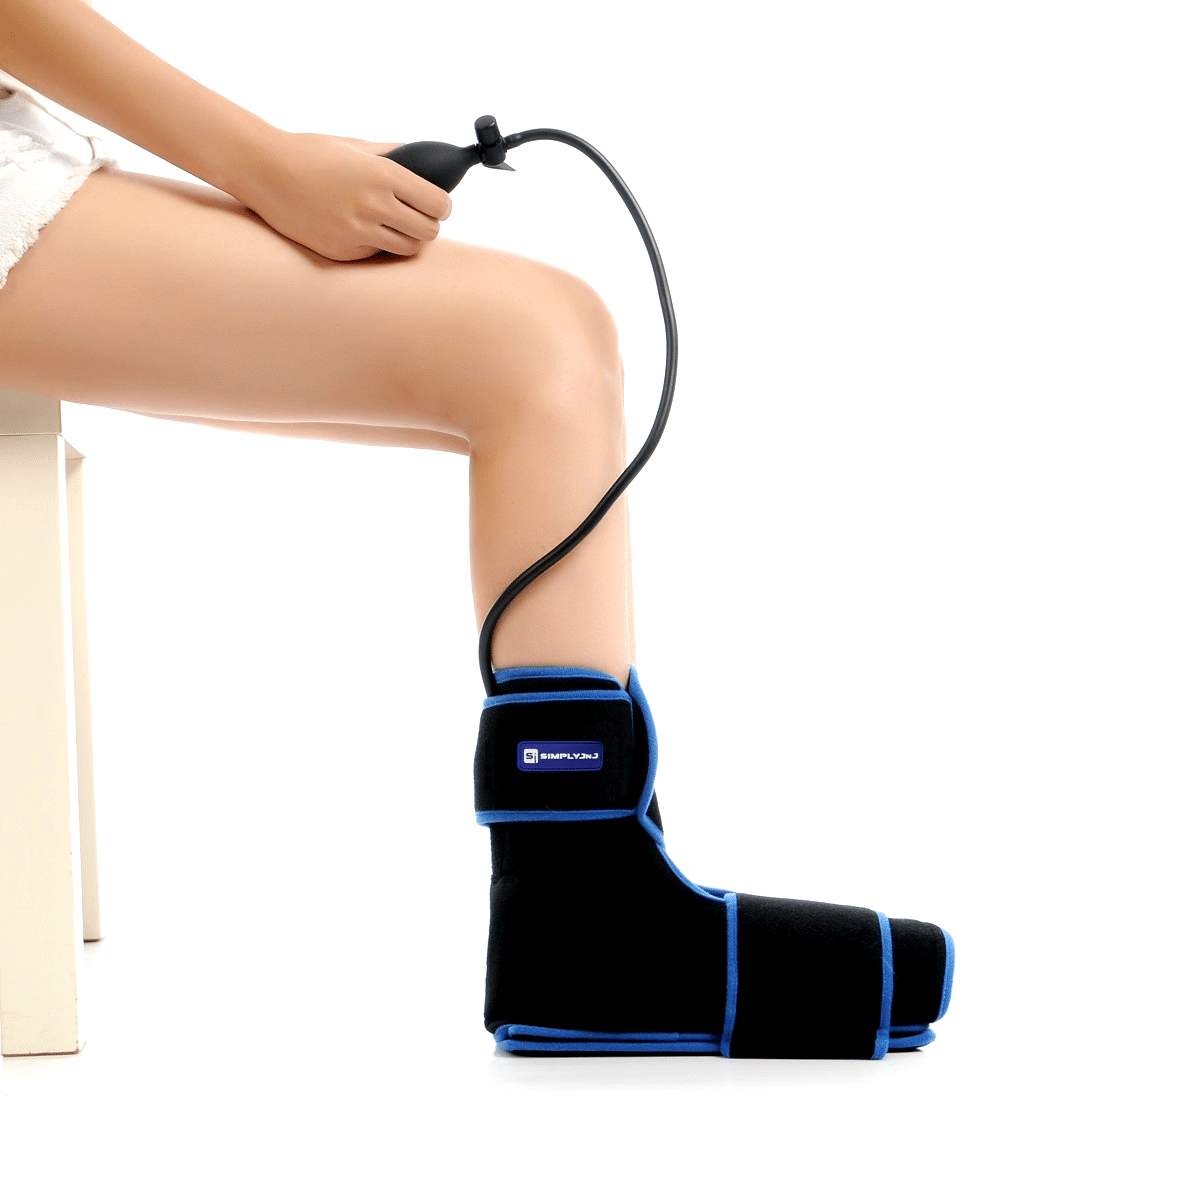 Extra Ice Pack Targets All Areas Effectively Relieve Foot and Ankle Aches & Pains Using Compression Gel wrap Treat My Feet Foot & Ankle Pain Relief Hot/Cold Boot Foot Wrap Heated or Cooled